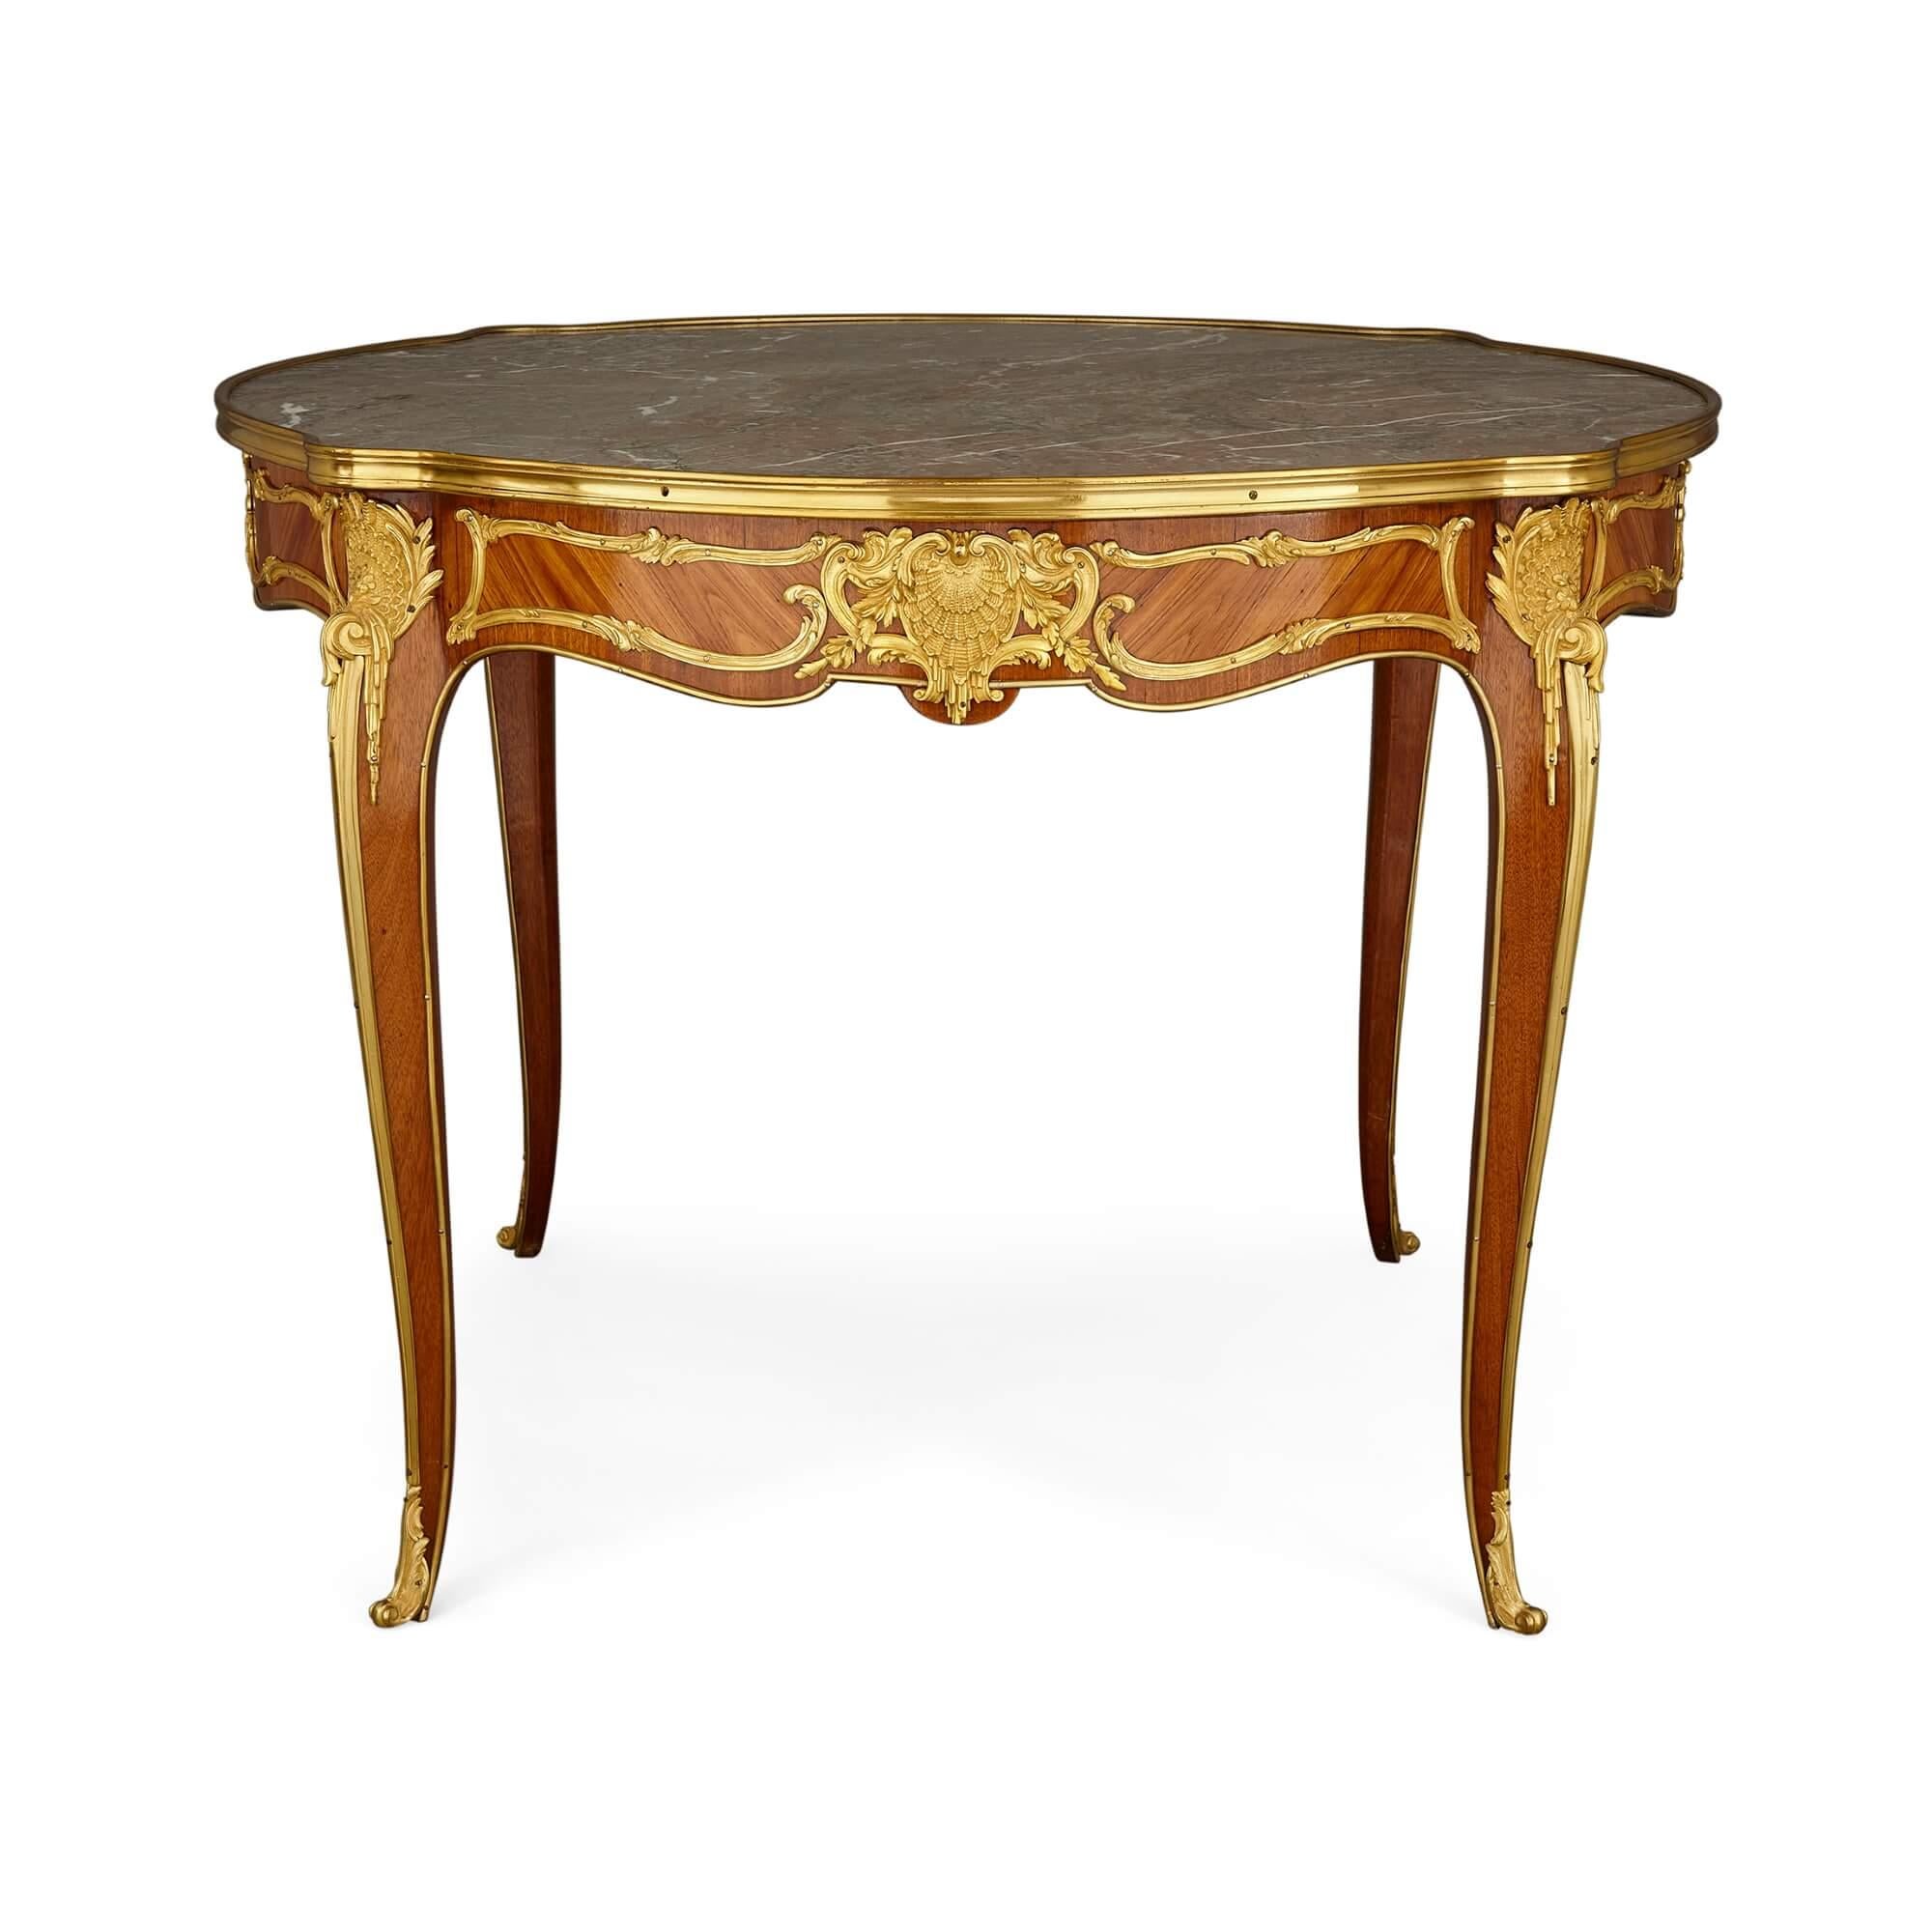 Antique Rococo style rosewood, ormolu and marble centre table.
French, Early 20th century.
Measures: height 76cm, diameter 92 cm.

This expertly crafted rosewood centre table is in the Rococo style. The table features four cabriole legs which